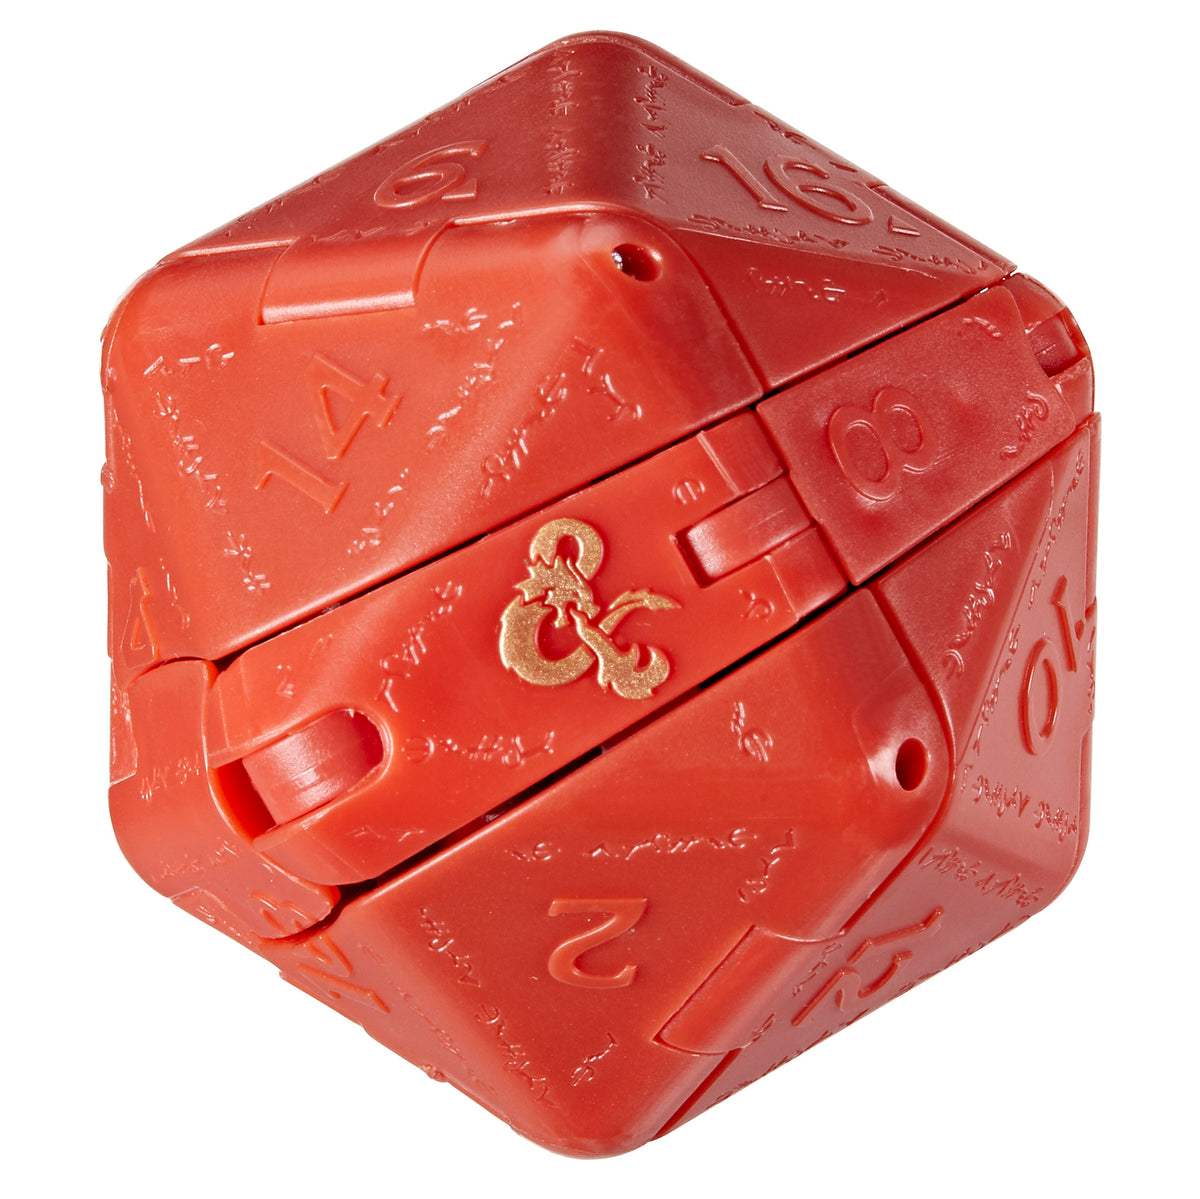 Dragon D20 Dice Holder for Dungeons And Dragons D&D Gaming